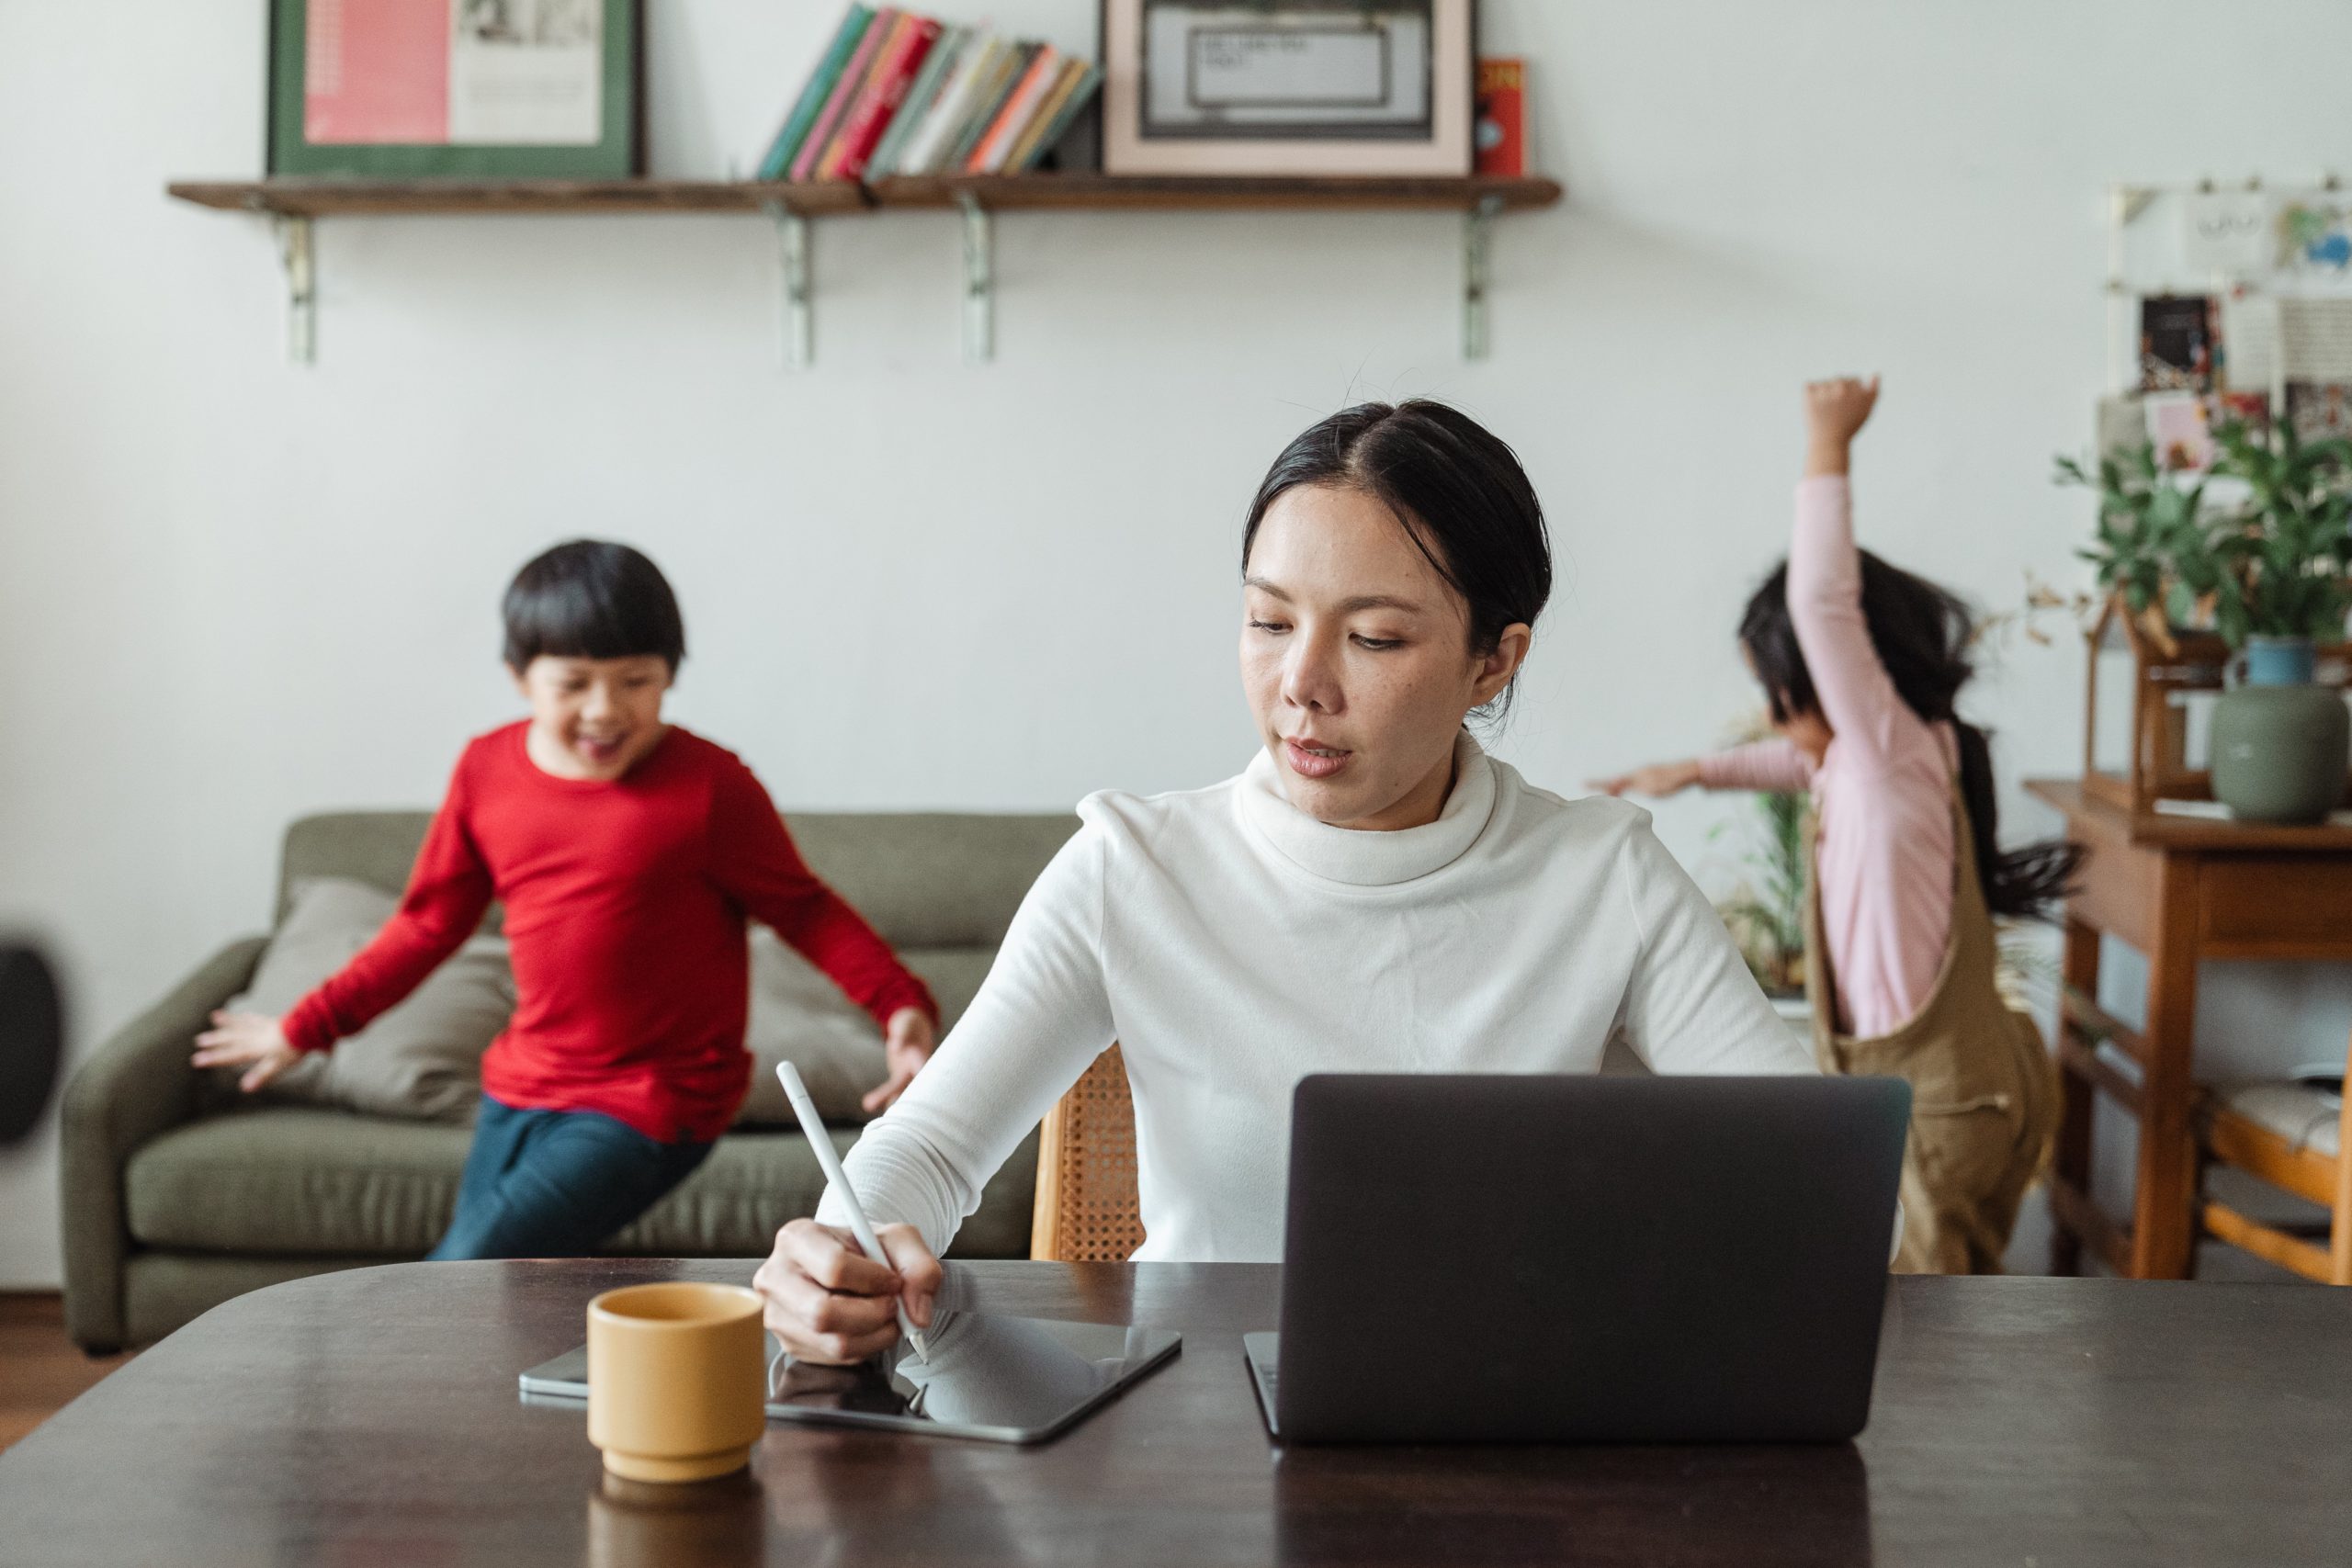 Empowering Stay-at-Home Moms: 20 Rewarding Work-from-Home Jobs